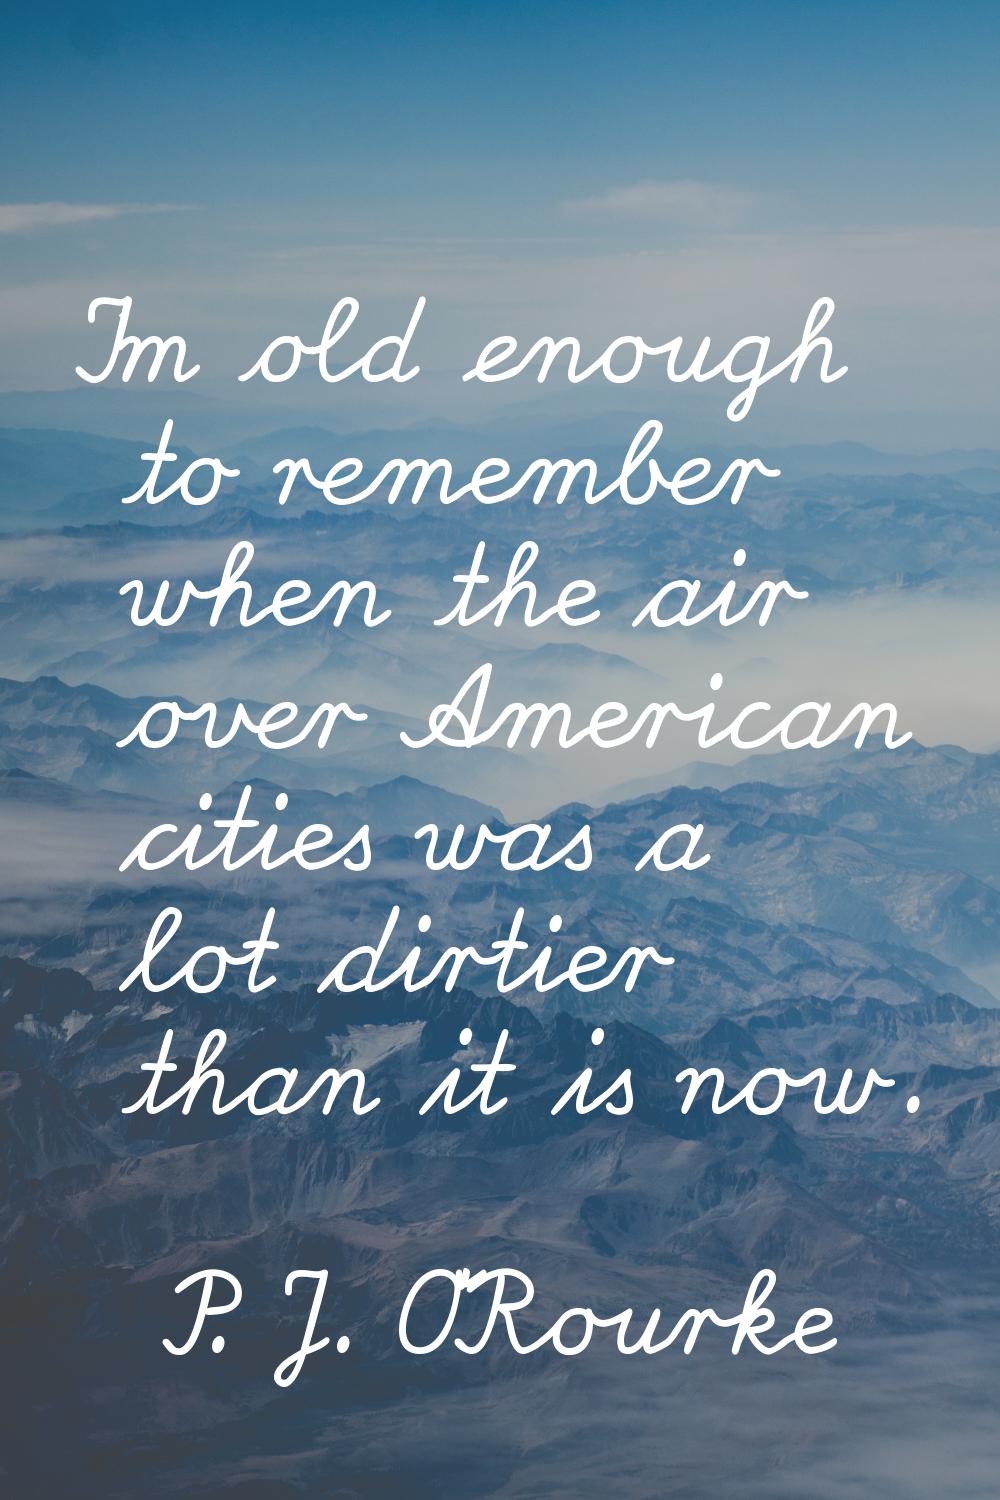 I'm old enough to remember when the air over American cities was a lot dirtier than it is now.